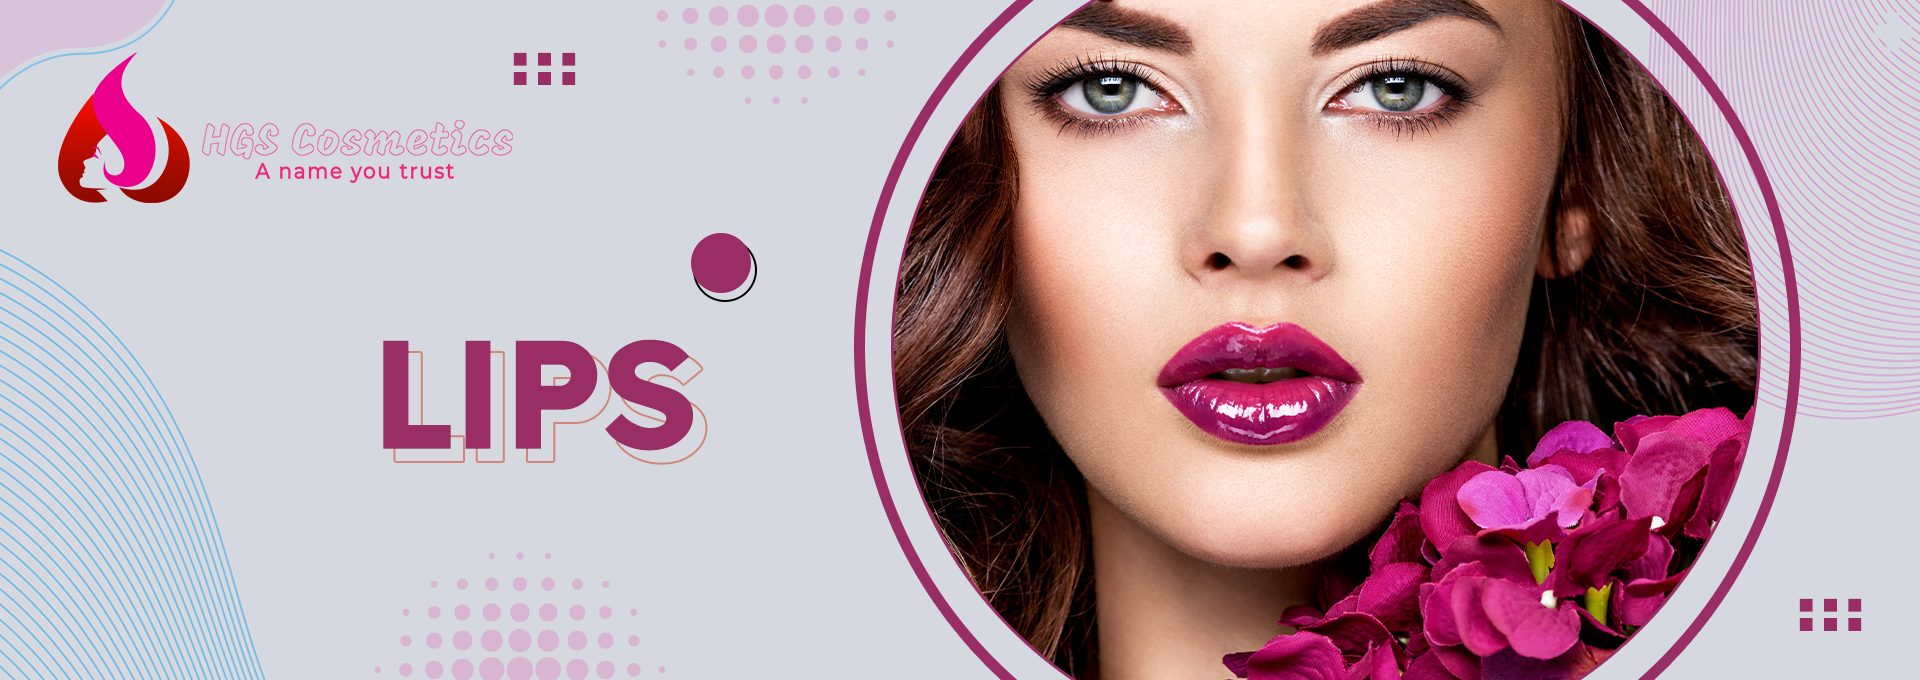 Shop Best Lips products Online @ HGS Cosmetics